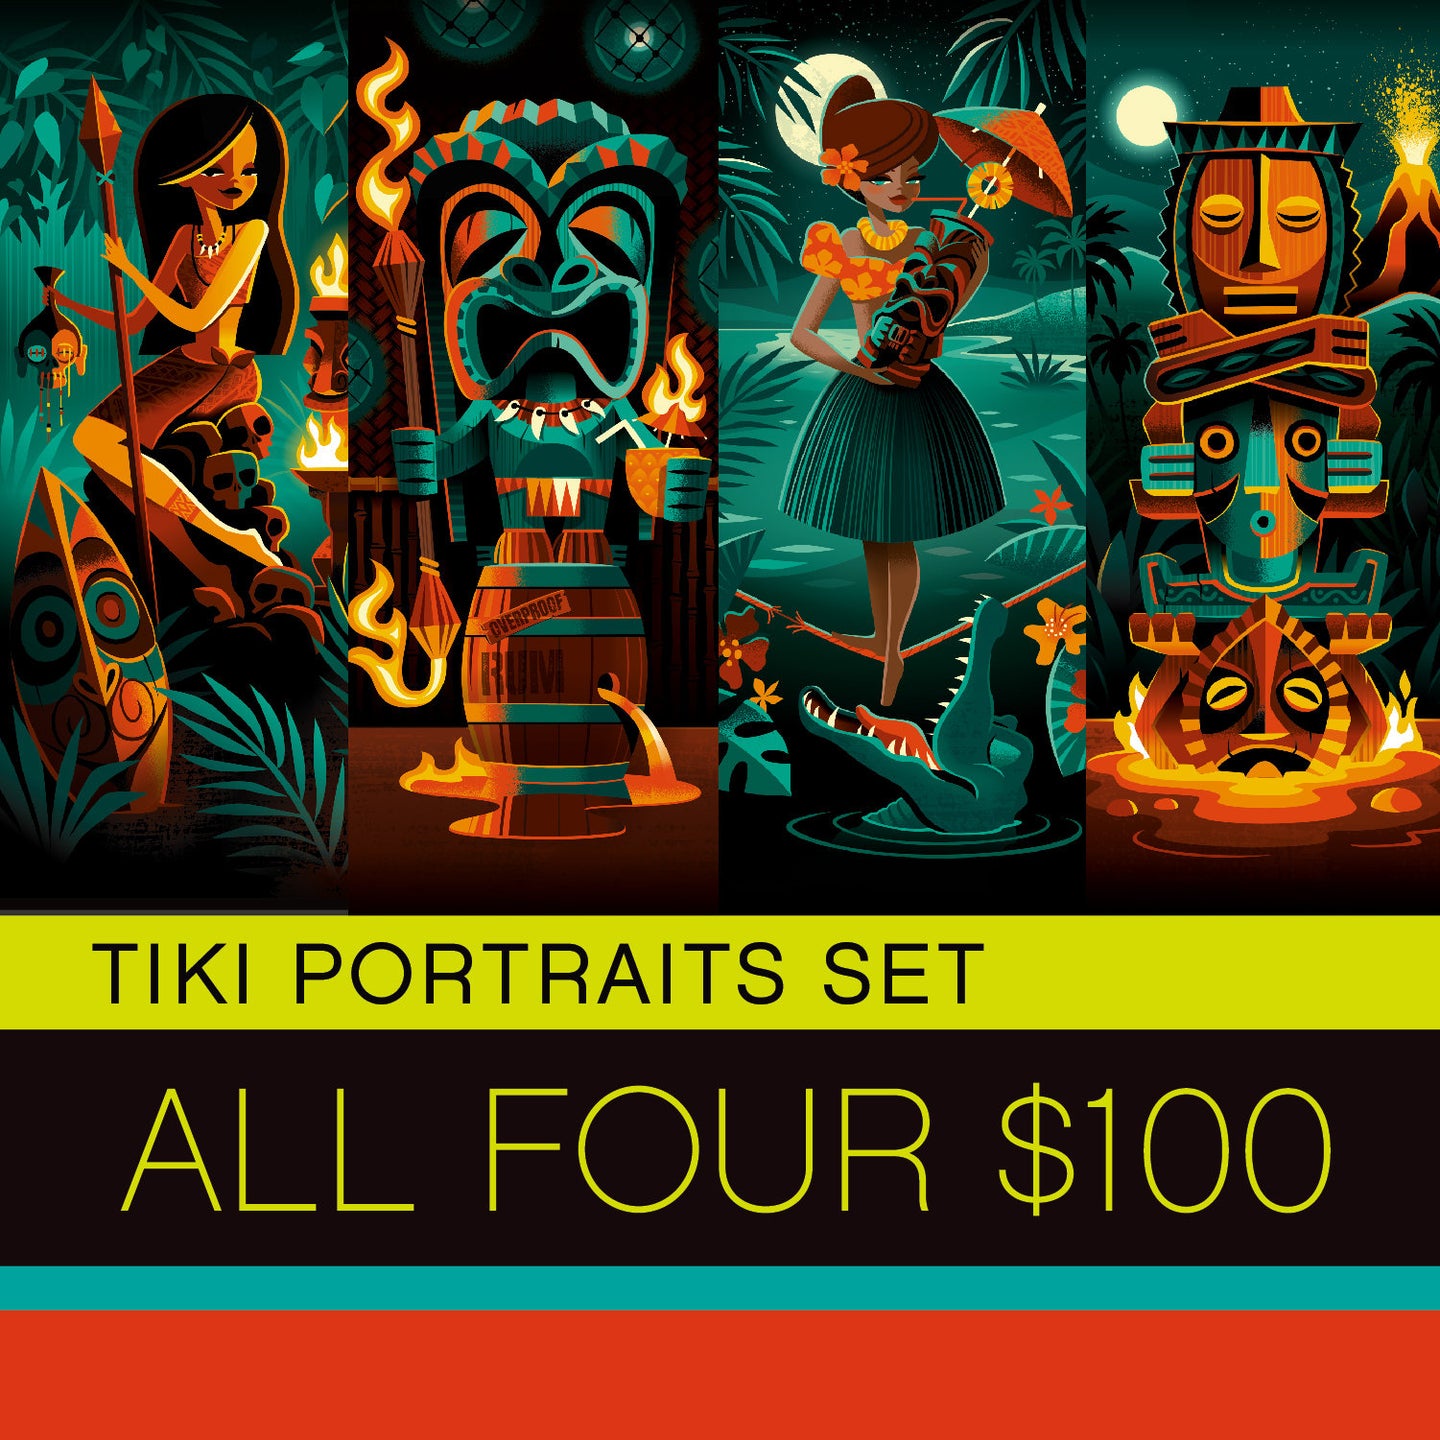 Tiki Portraits Print Set, All Four Deluxe Matted Prints